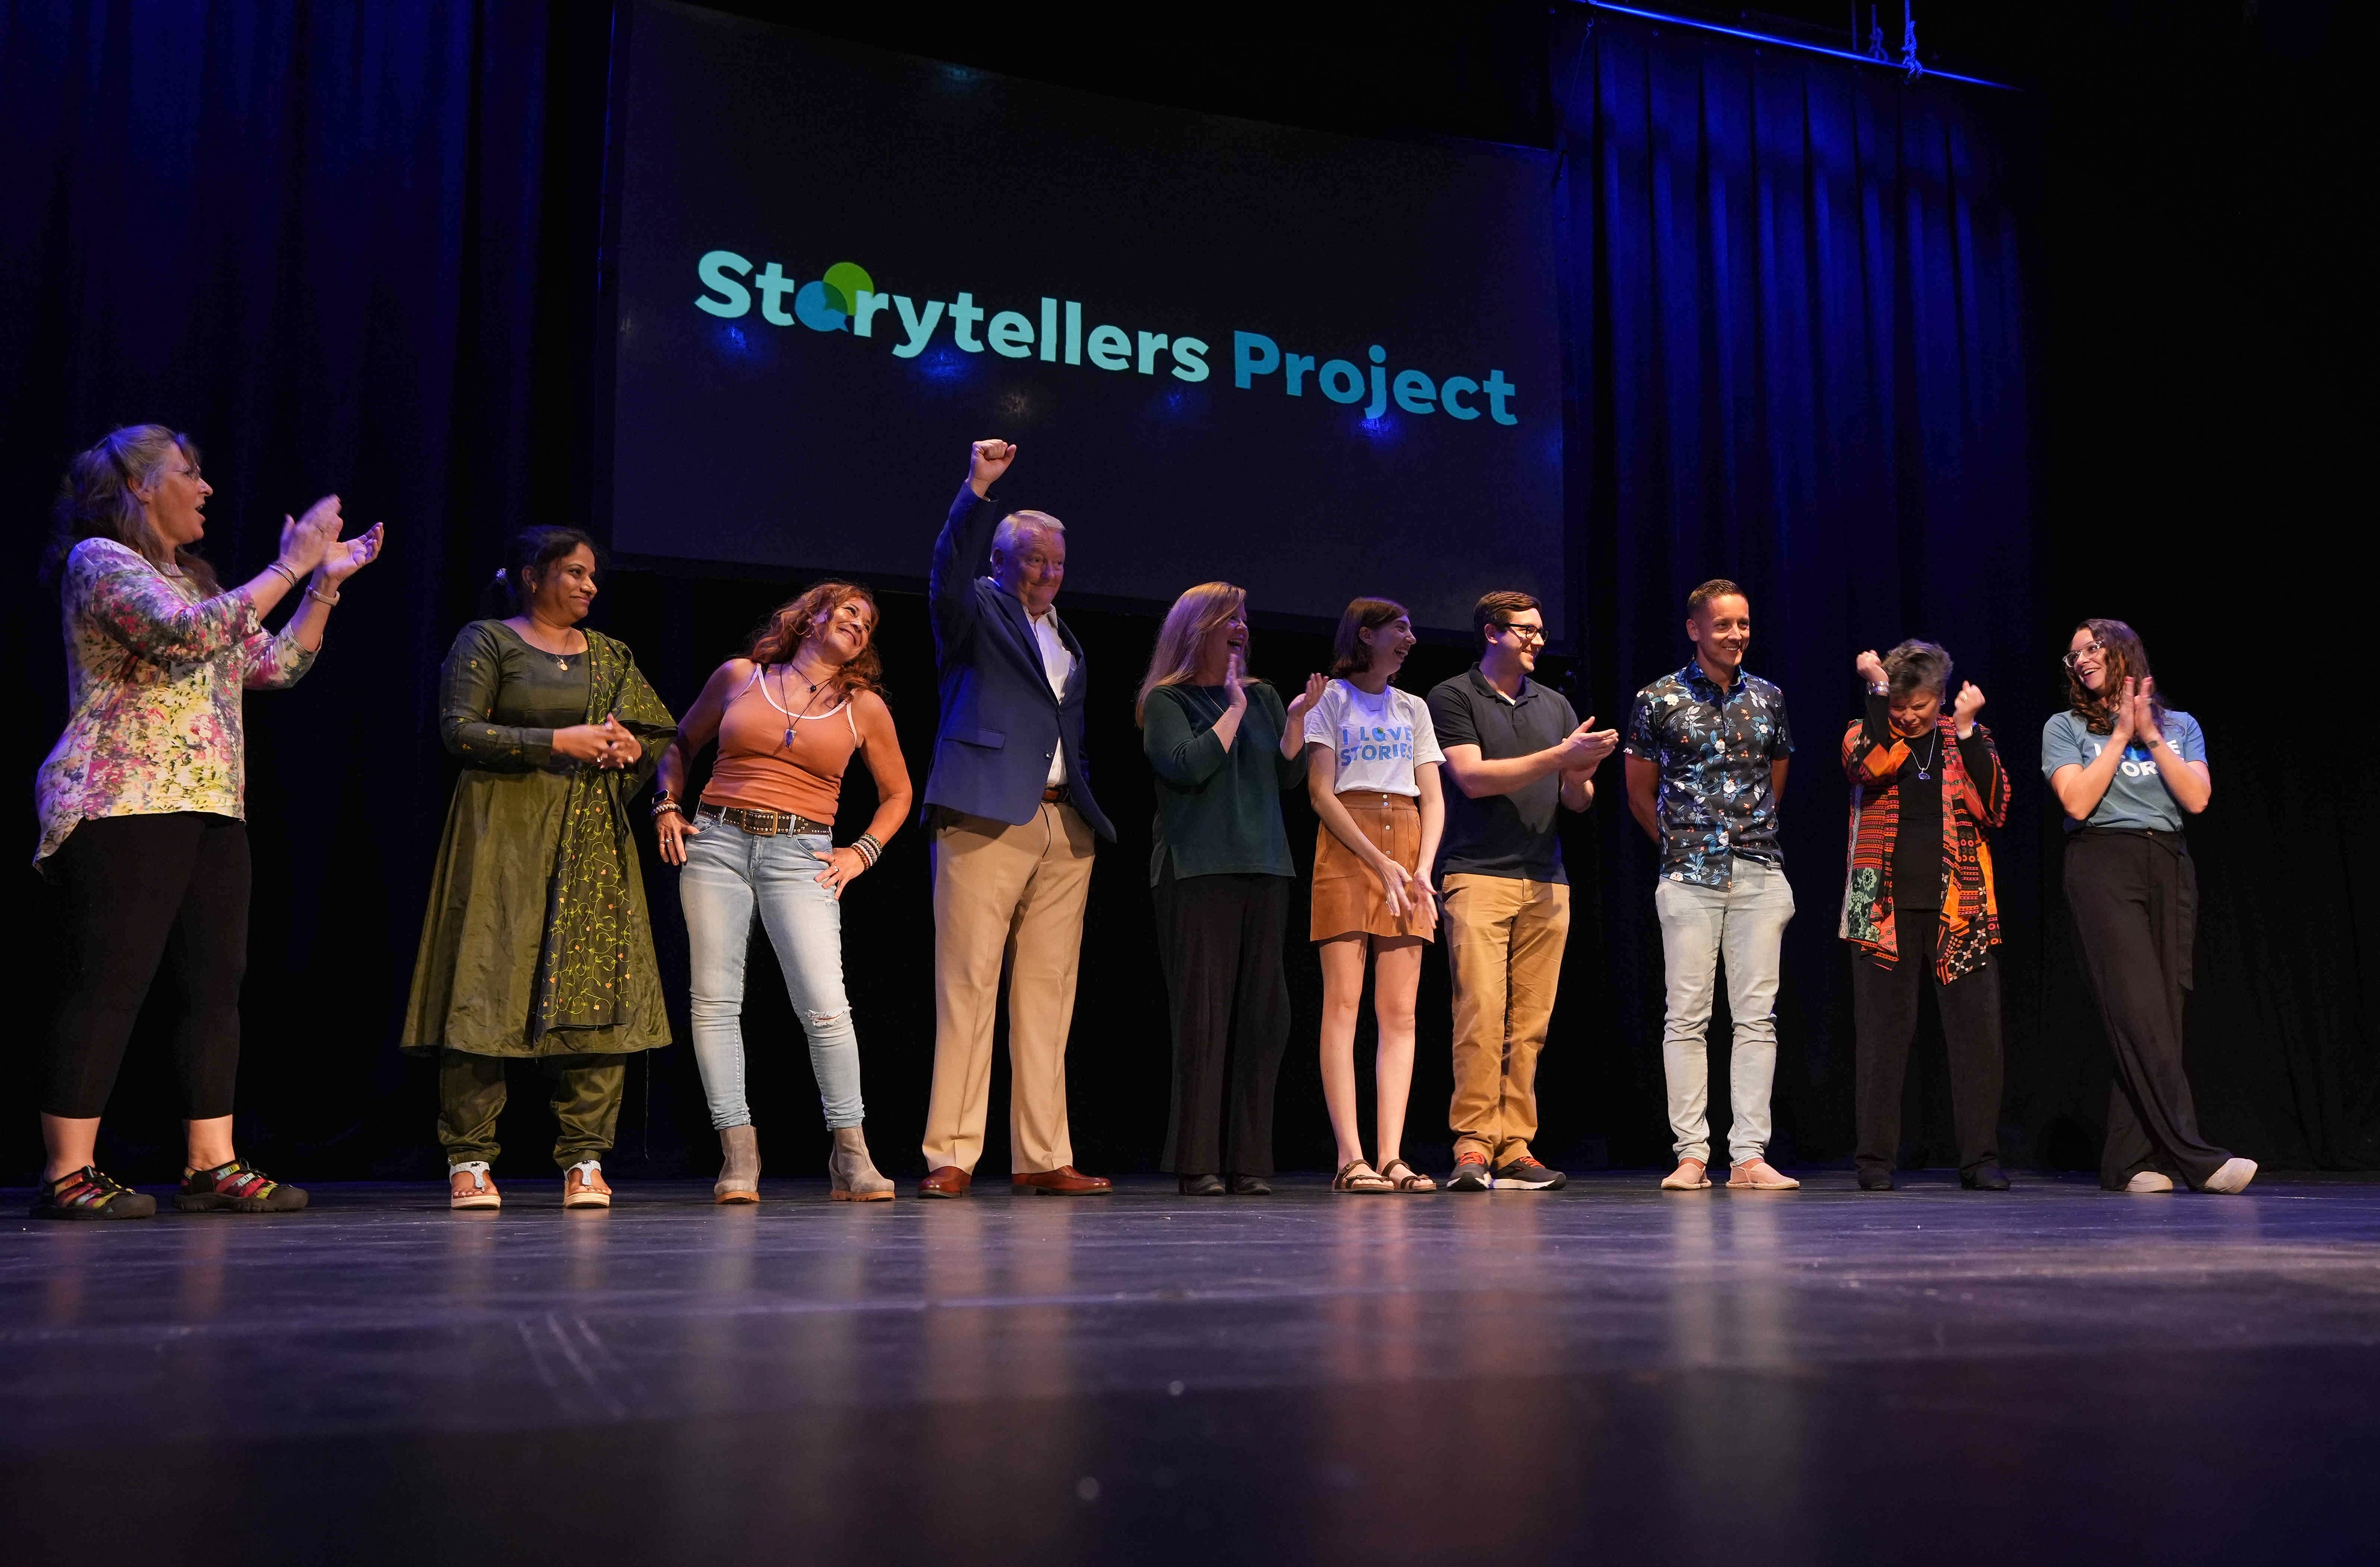 Des Moines Storytellers Project 'Obsessions' Meet the storytellers